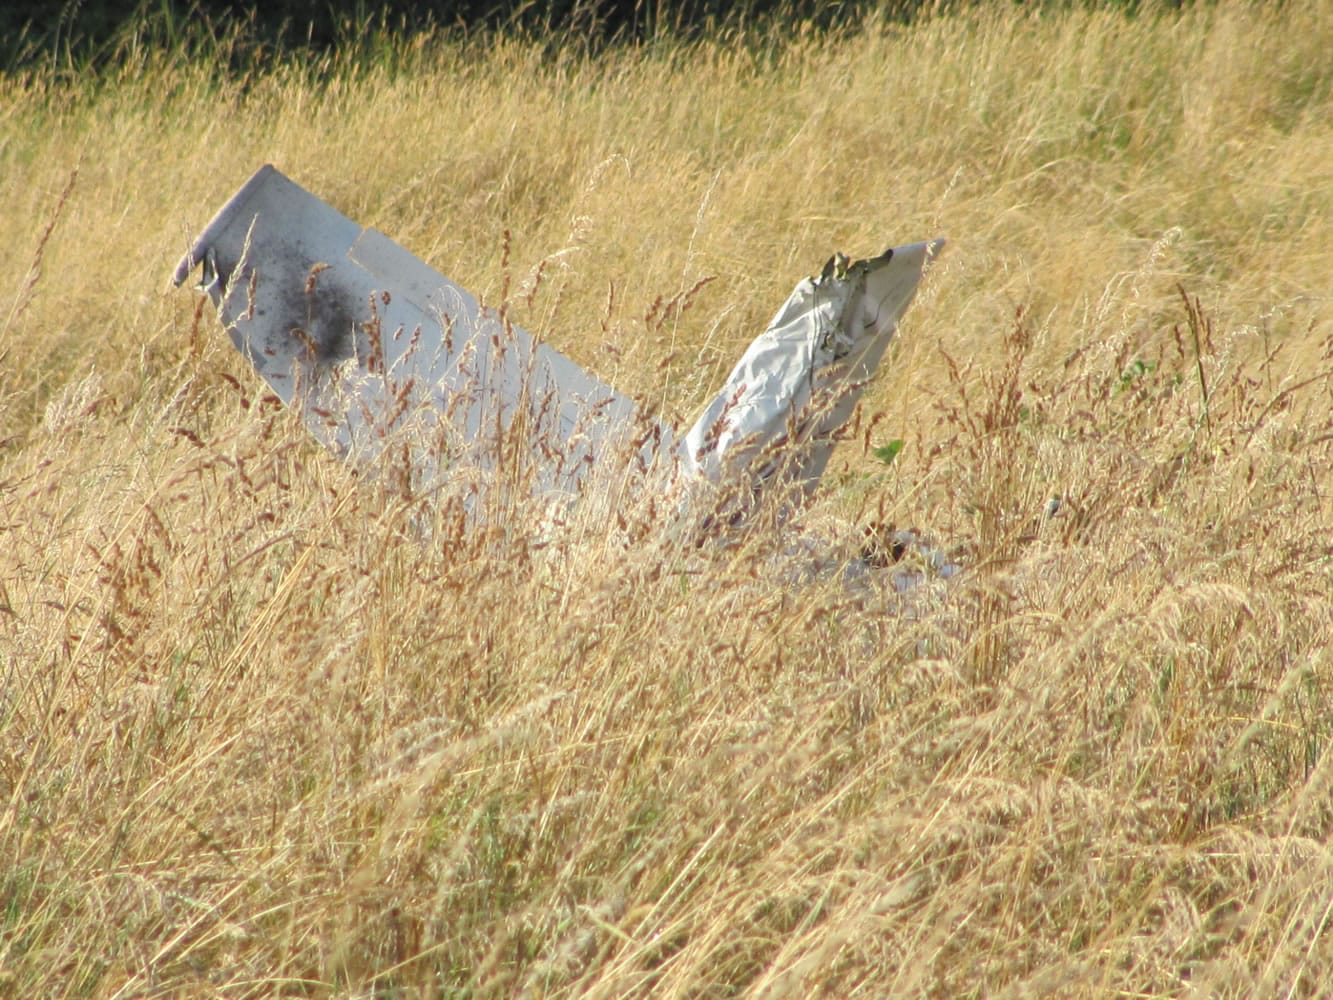 A single-engine, four passenger airplane -- a Piper Comanche P24-250 -- flown by Wilbert &quot;Skeets&quot; Mehrer, crashed Wednesday afternoon in a field approximately 1/2 mile from Grove Field Airport. Mehrer, 84, of Canby, Ore., was pronounced dead at the scene.